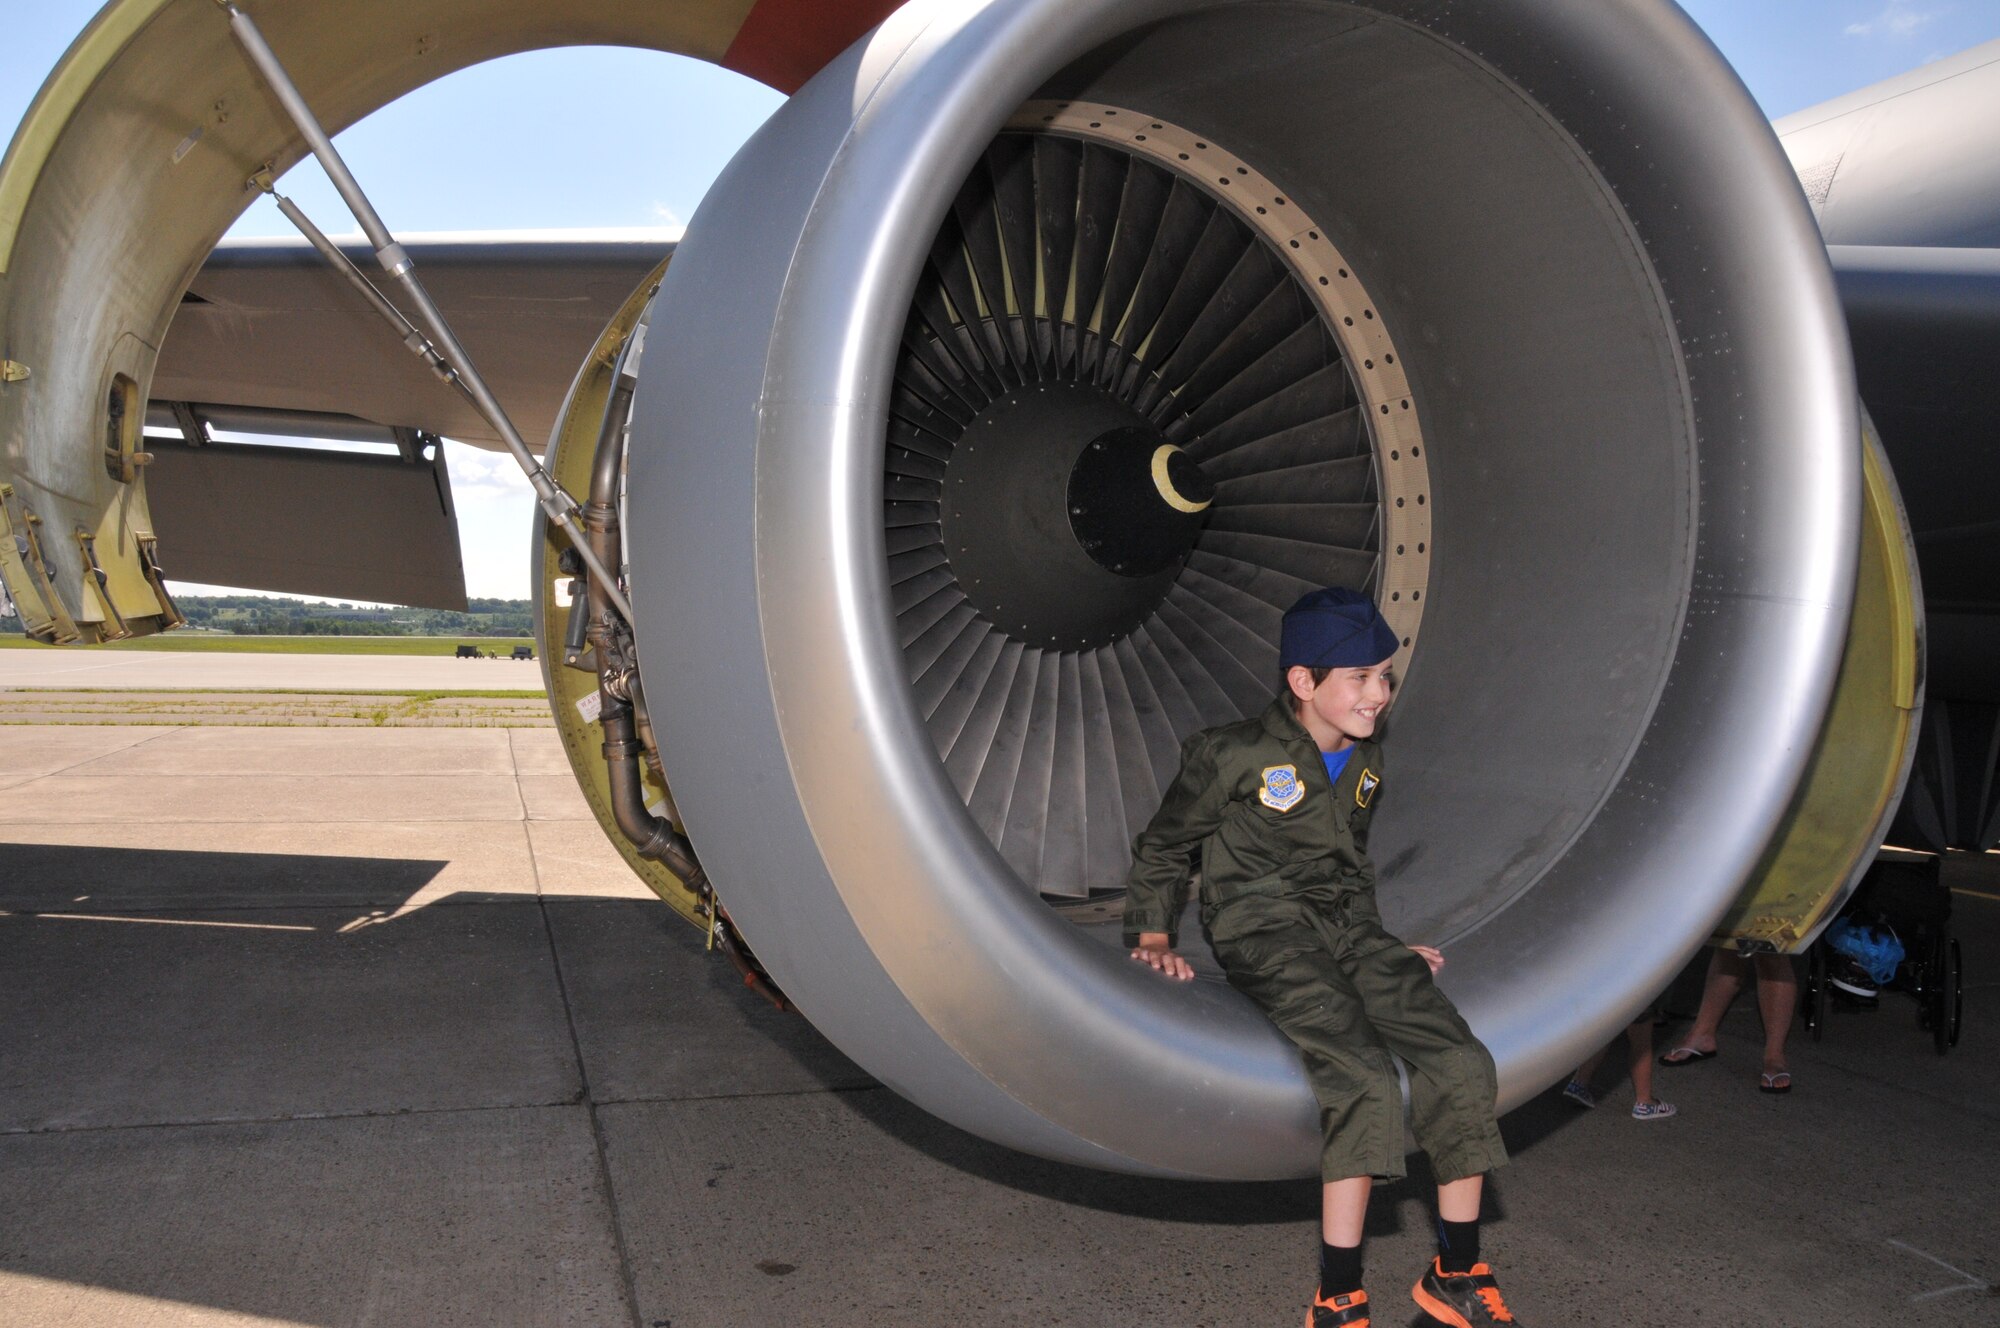 Eight year old Joey Fabus and his family were invited to the 171st Air Refueling Wing located near Pittsburgh Pa. for Joey to be Commander for a day July 17, 2014. Joey has Diffuse Intrinsic Pontine Glioma, an inoperable tumor that grows in the middle of the brainstem, his condition is terminal. Joey was sworn in as commander of the 171st from the Mission Support Group Commander Colonel Mark Goodwill. He then received his flight suit, hat, and pilot wings. From there, Joey toured the security forces section where he got to see, hands on, the different weapons the 171st uses. Joey was then given an intelligence briefing and given a scenario where he had to make a command decision. He then got a tour of one of the KC-135 R/T Stratotanker aircraft. The day ended when Joey received a medal for his bravery from 171st Maintenance Group Commander Colonel Thomas Hess.  Joey’s parents, Cindy and Dave, were awarded a center of influence medal. It has always been a dream of Joey’s to be in the Military. (U.S. Air National Guard Photo by Major Karen Bogdan/Released)